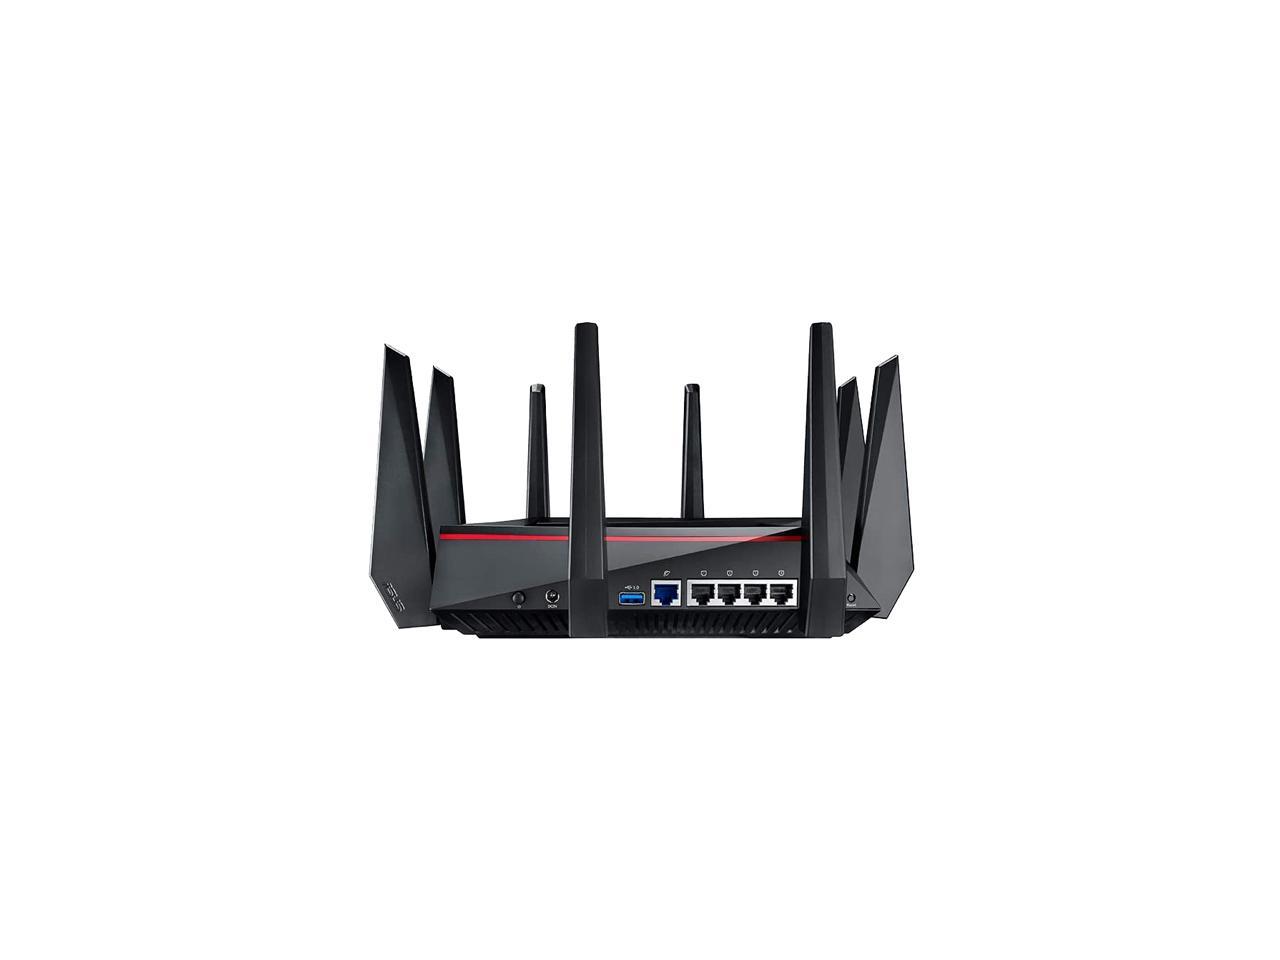 Asus Rt-Ac5300 Tri-Band Wireless-Ac5300 Gigabit Router